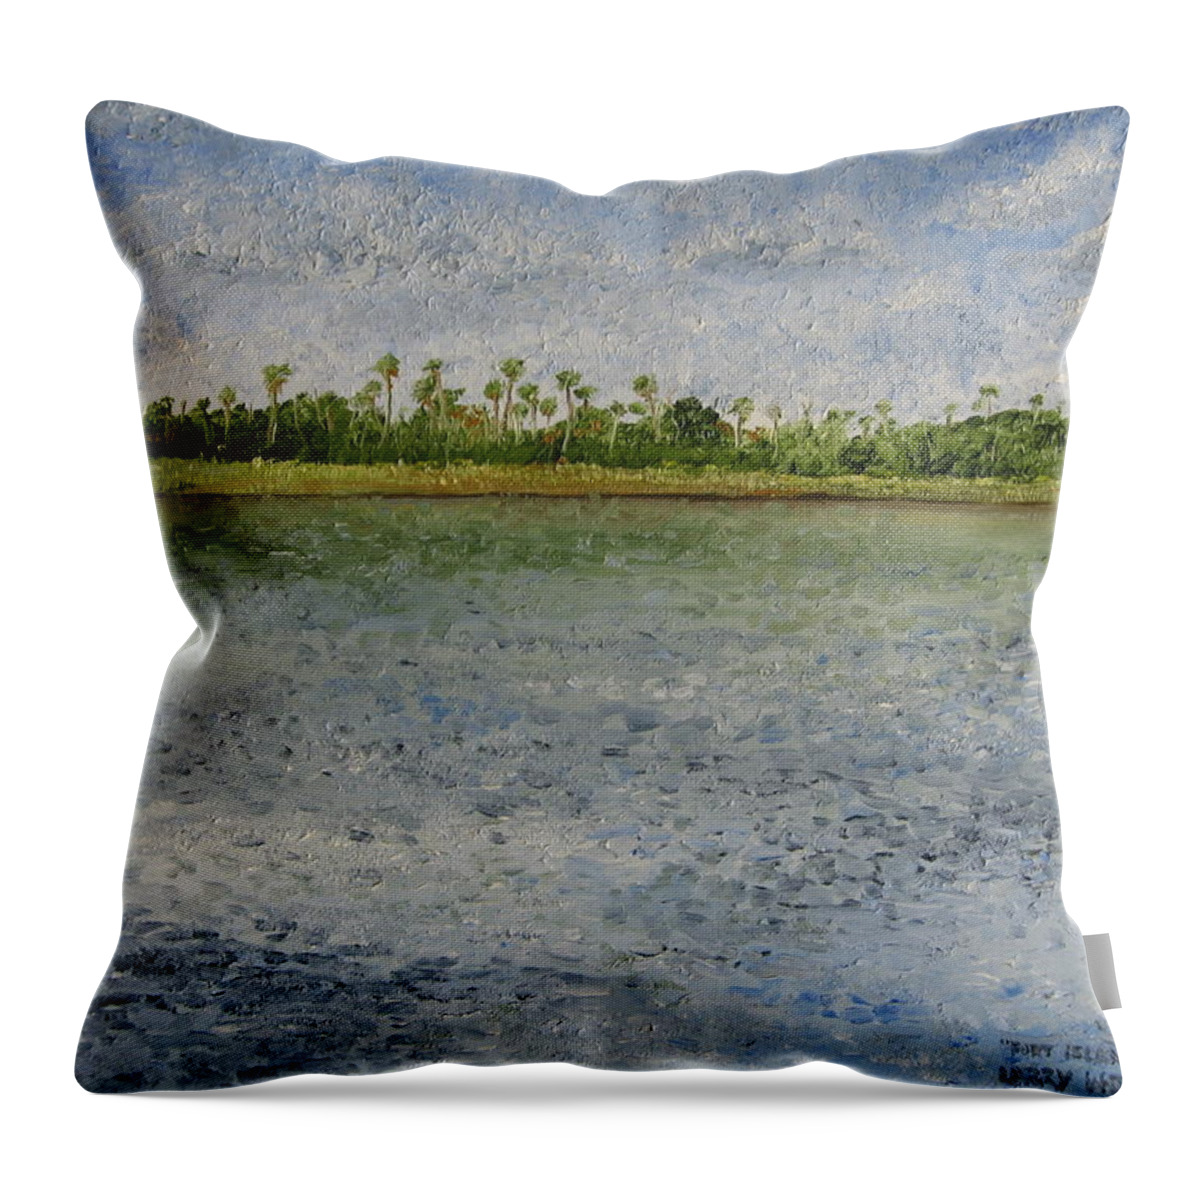 Landscape Throw Pillow featuring the painting Fort Island Trail Park by Larry Whitler